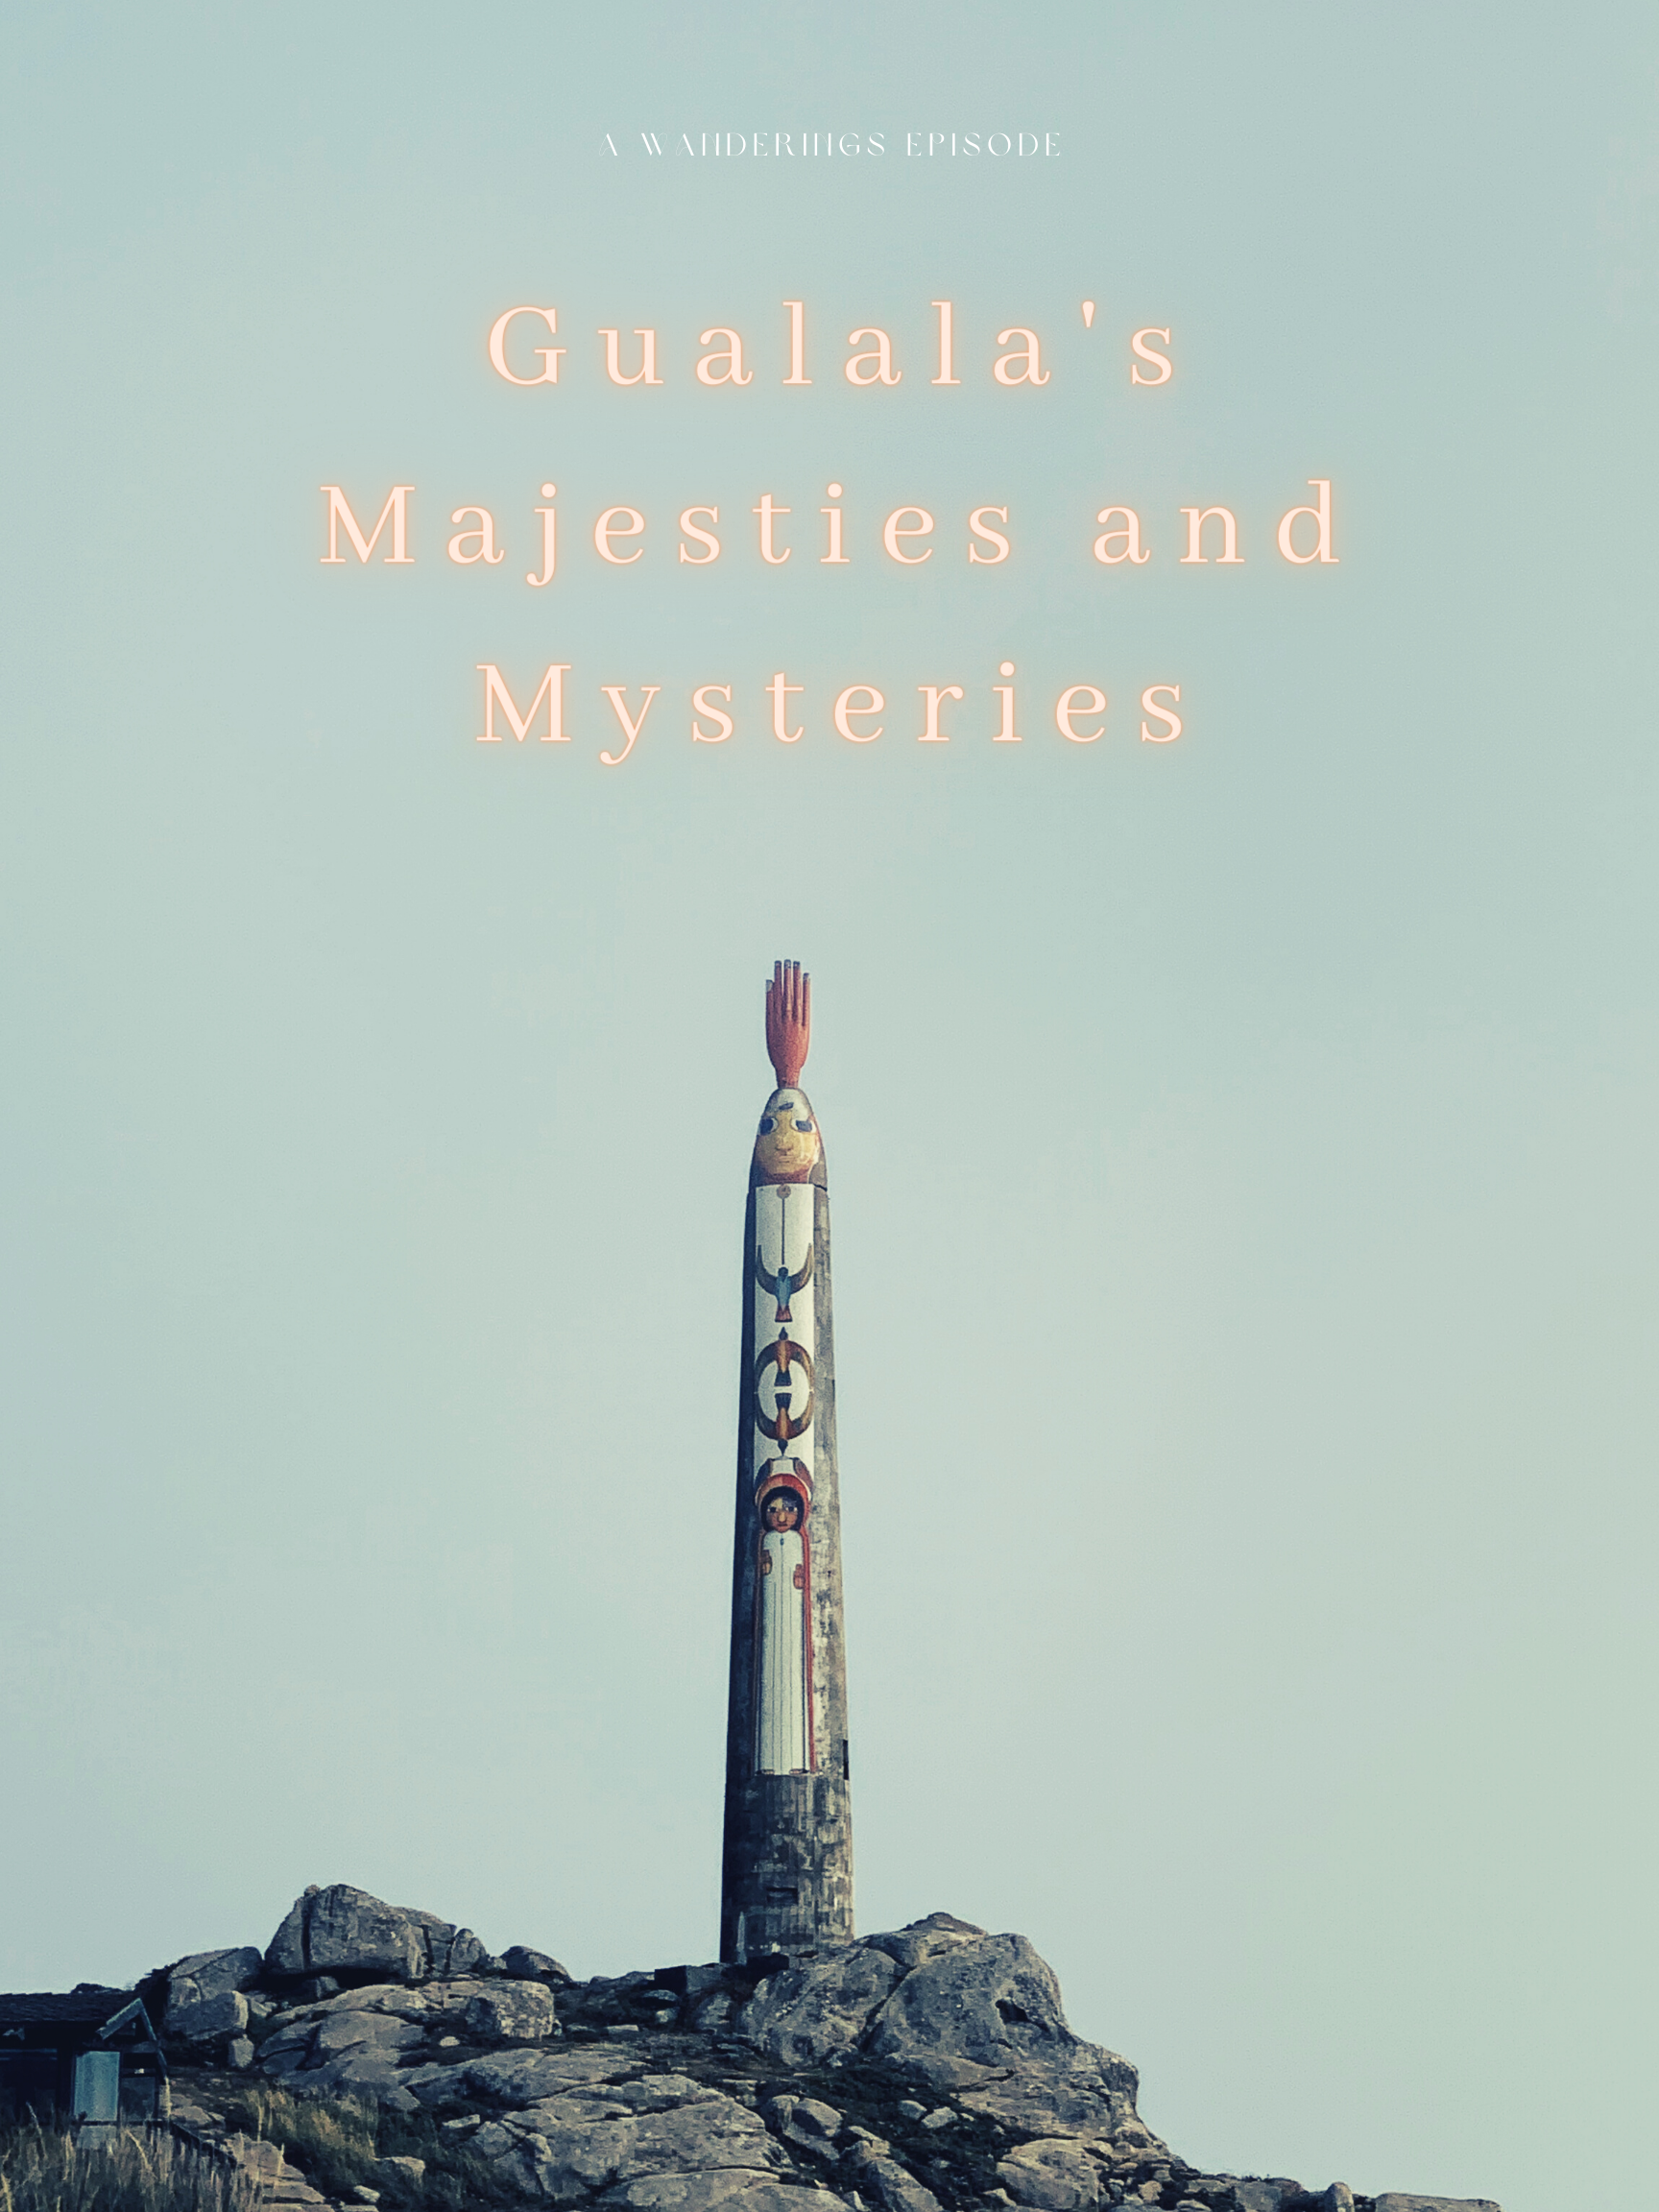 Gualala's Histories and Mysteries